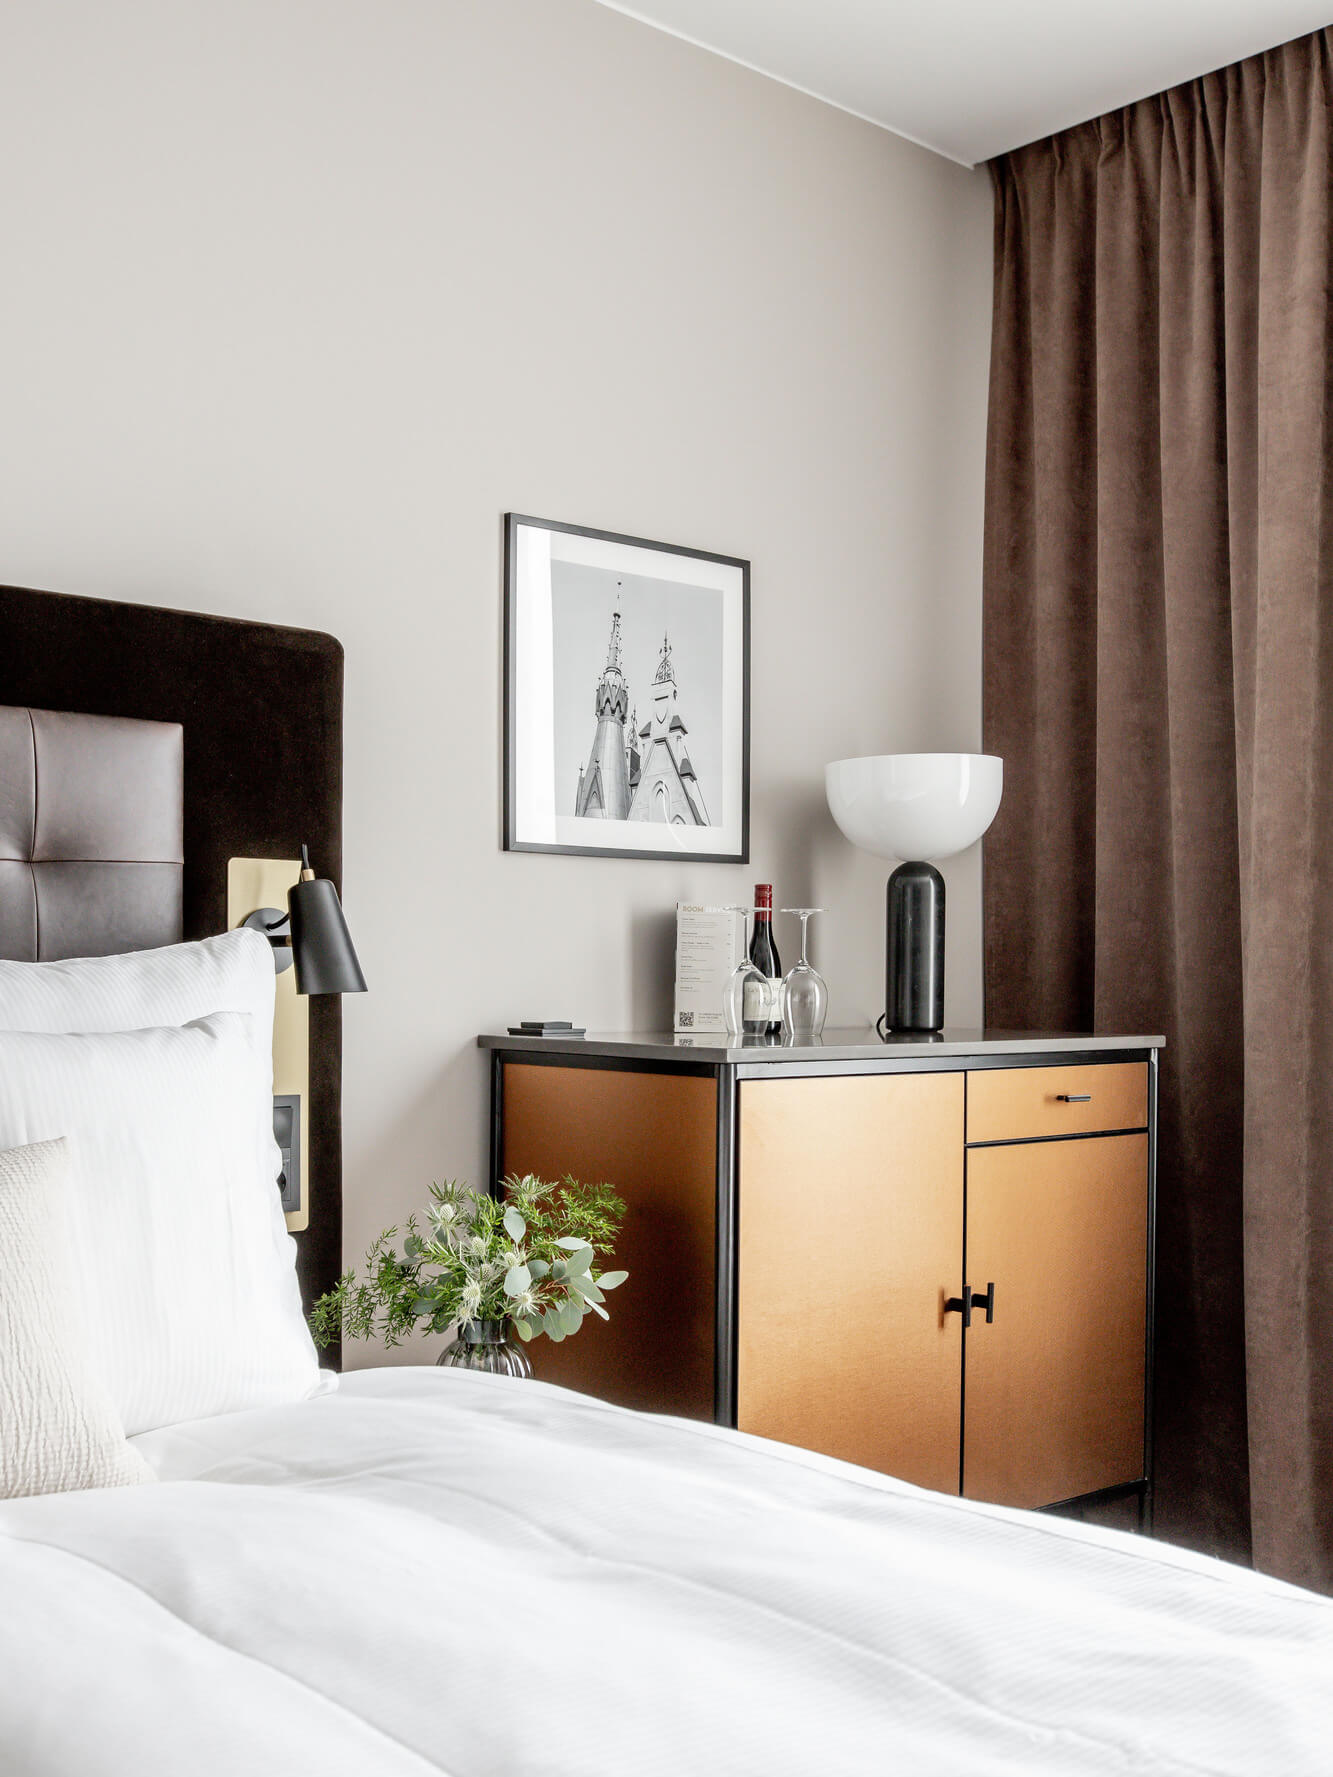 Bedroom details at Clarion Hotel® Sundsvall.